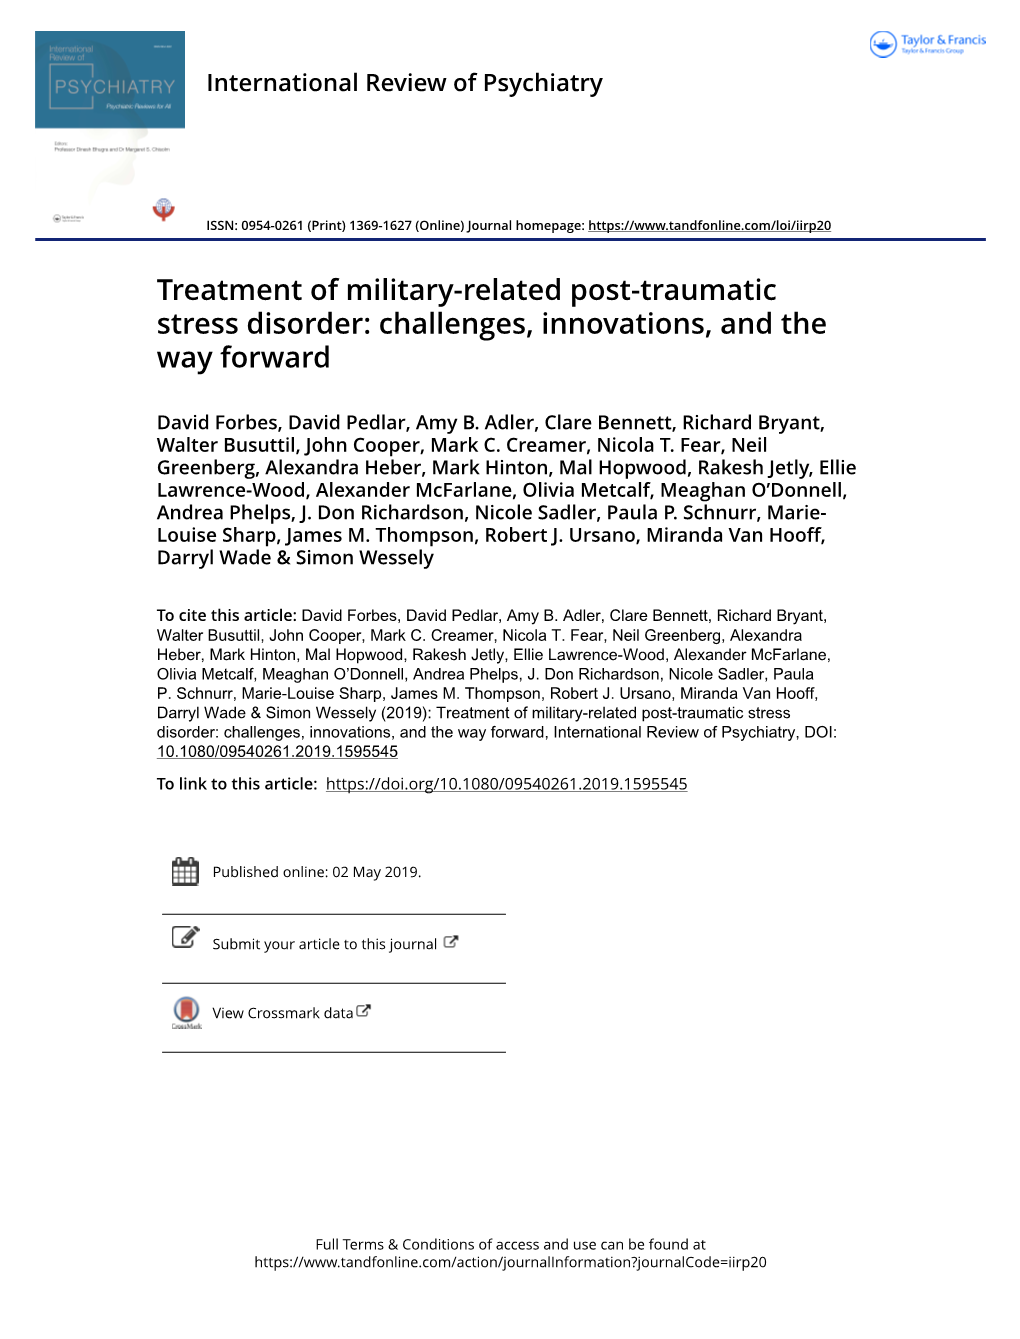 Treatment of Military-Related Post-Traumatic Stress Disorder: Challenges, Innovations, and the Way Forward